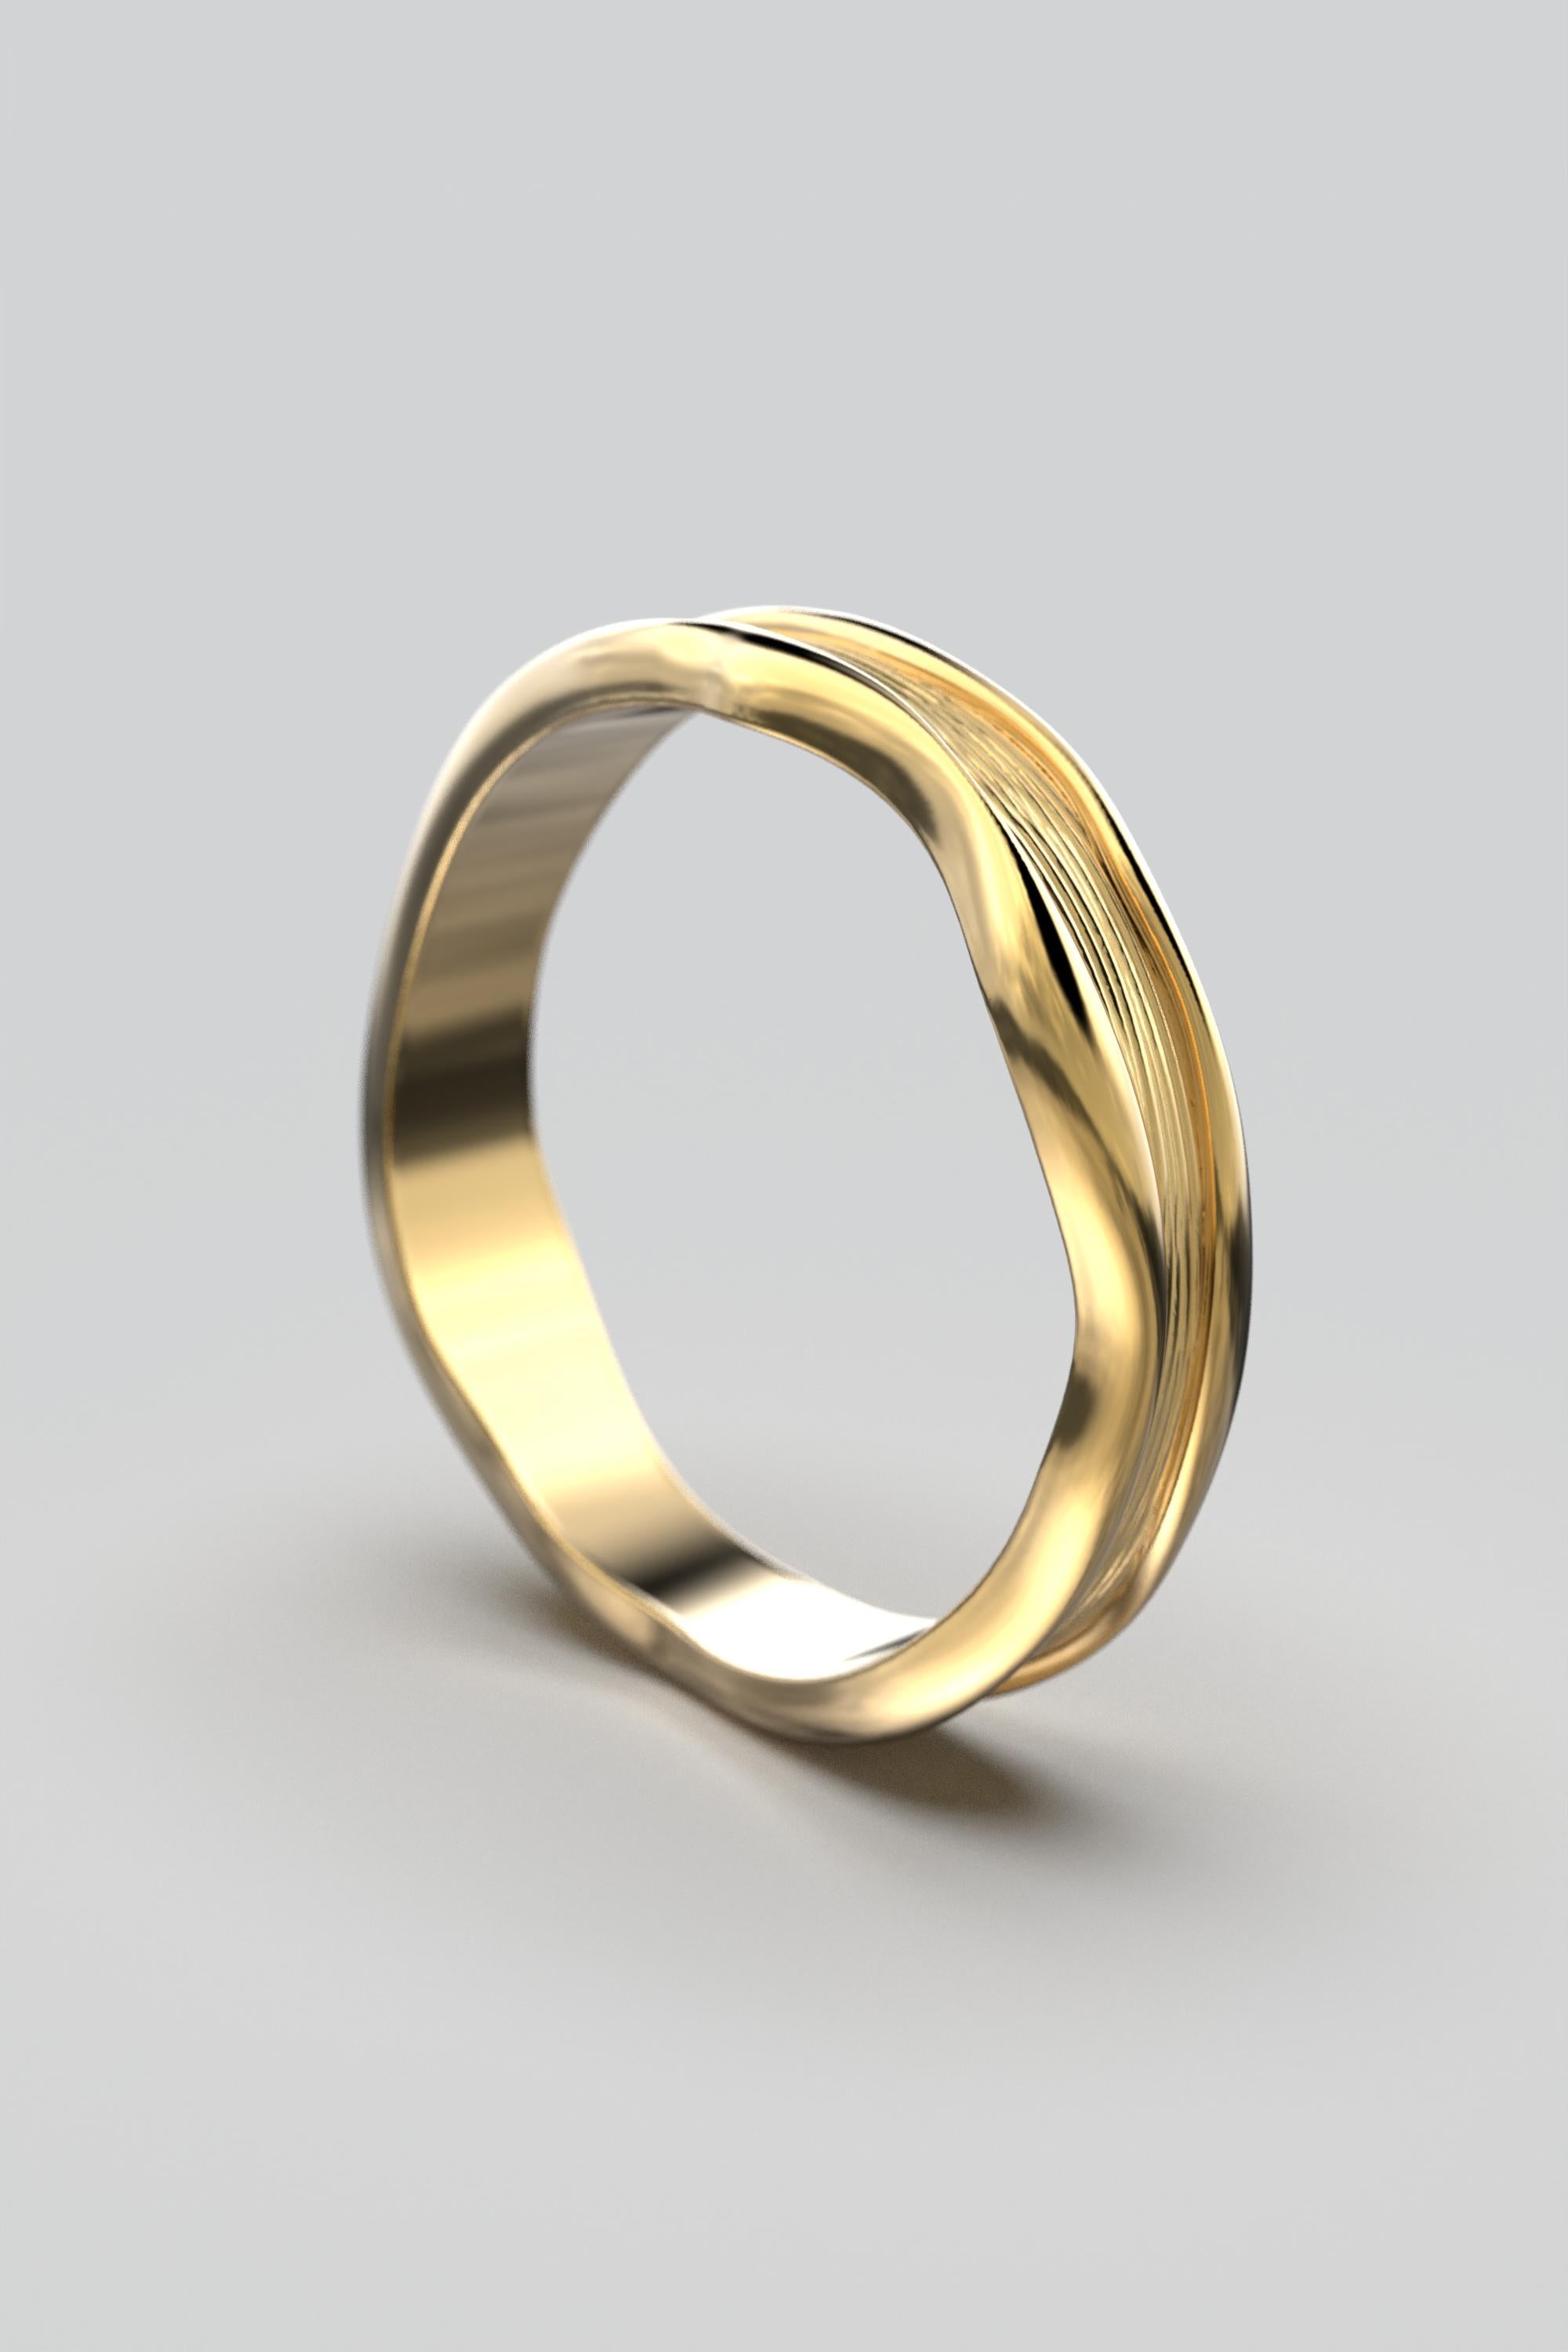 For Sale:  Florentine Finish Sophisticated Gold Wedding Band in 18k Made in Italy 3